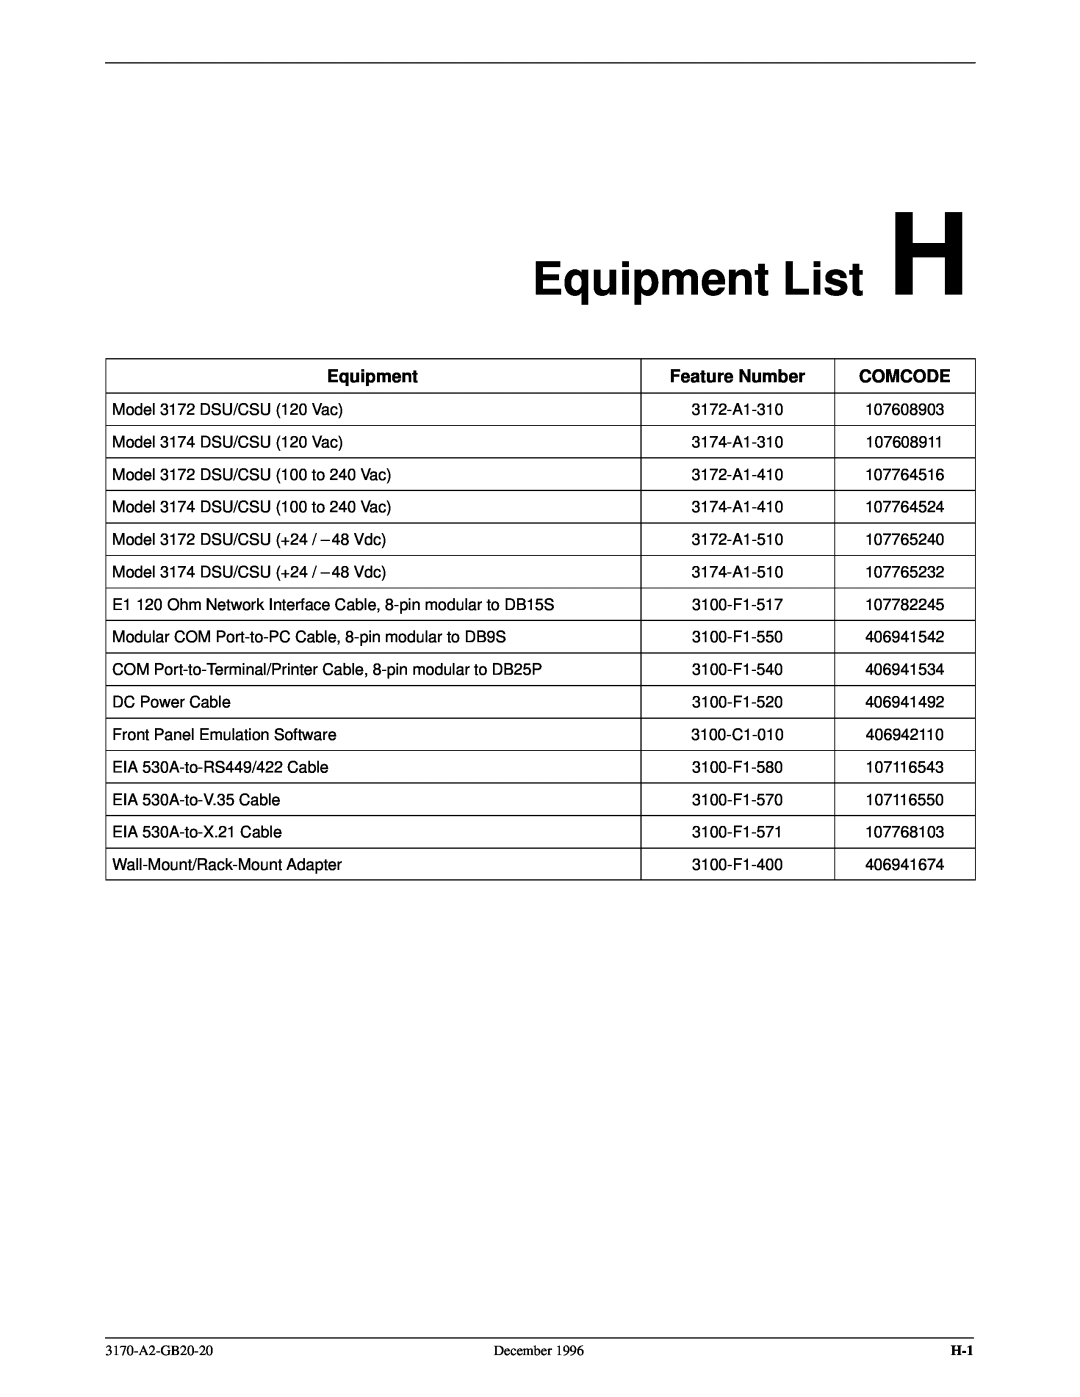 Paradyne 317x E1 manual Equipment List H, Feature Number, Comcode 